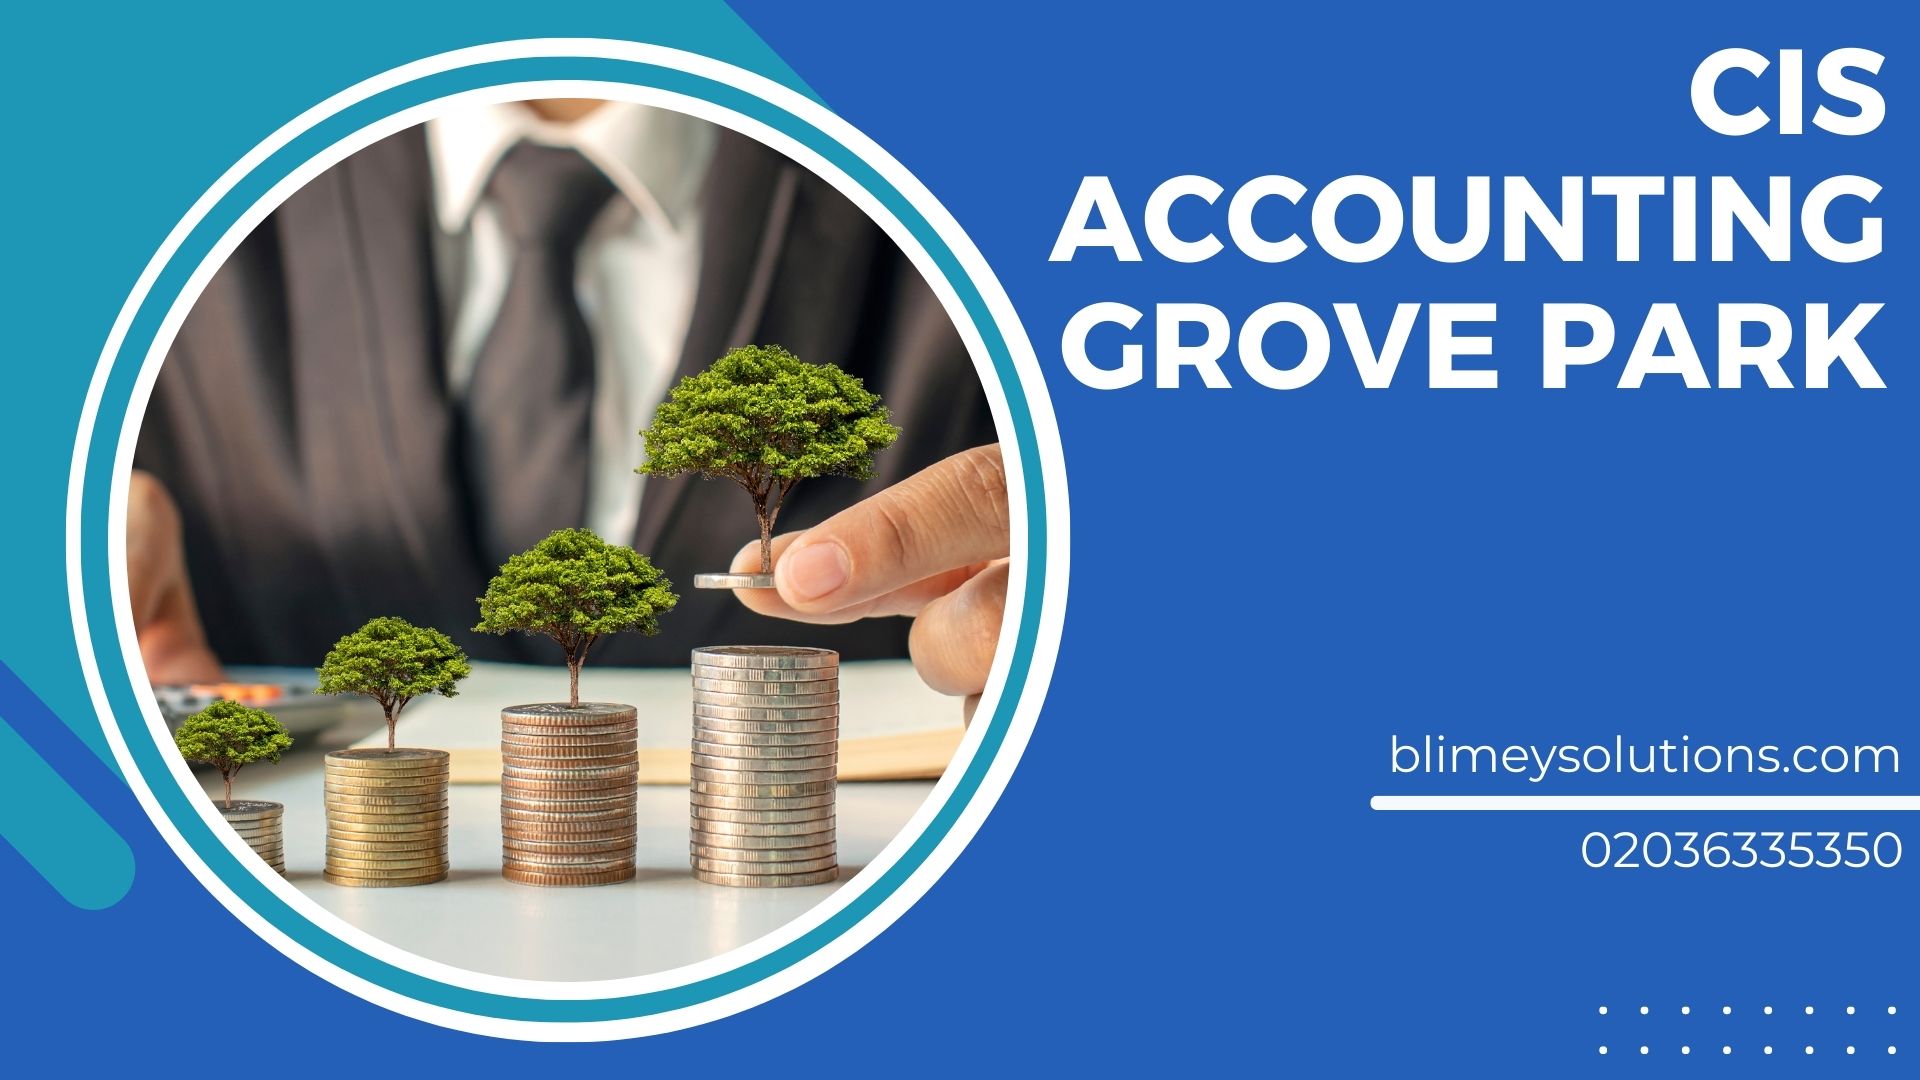 CIS Accounting in Grove Park SE12 London